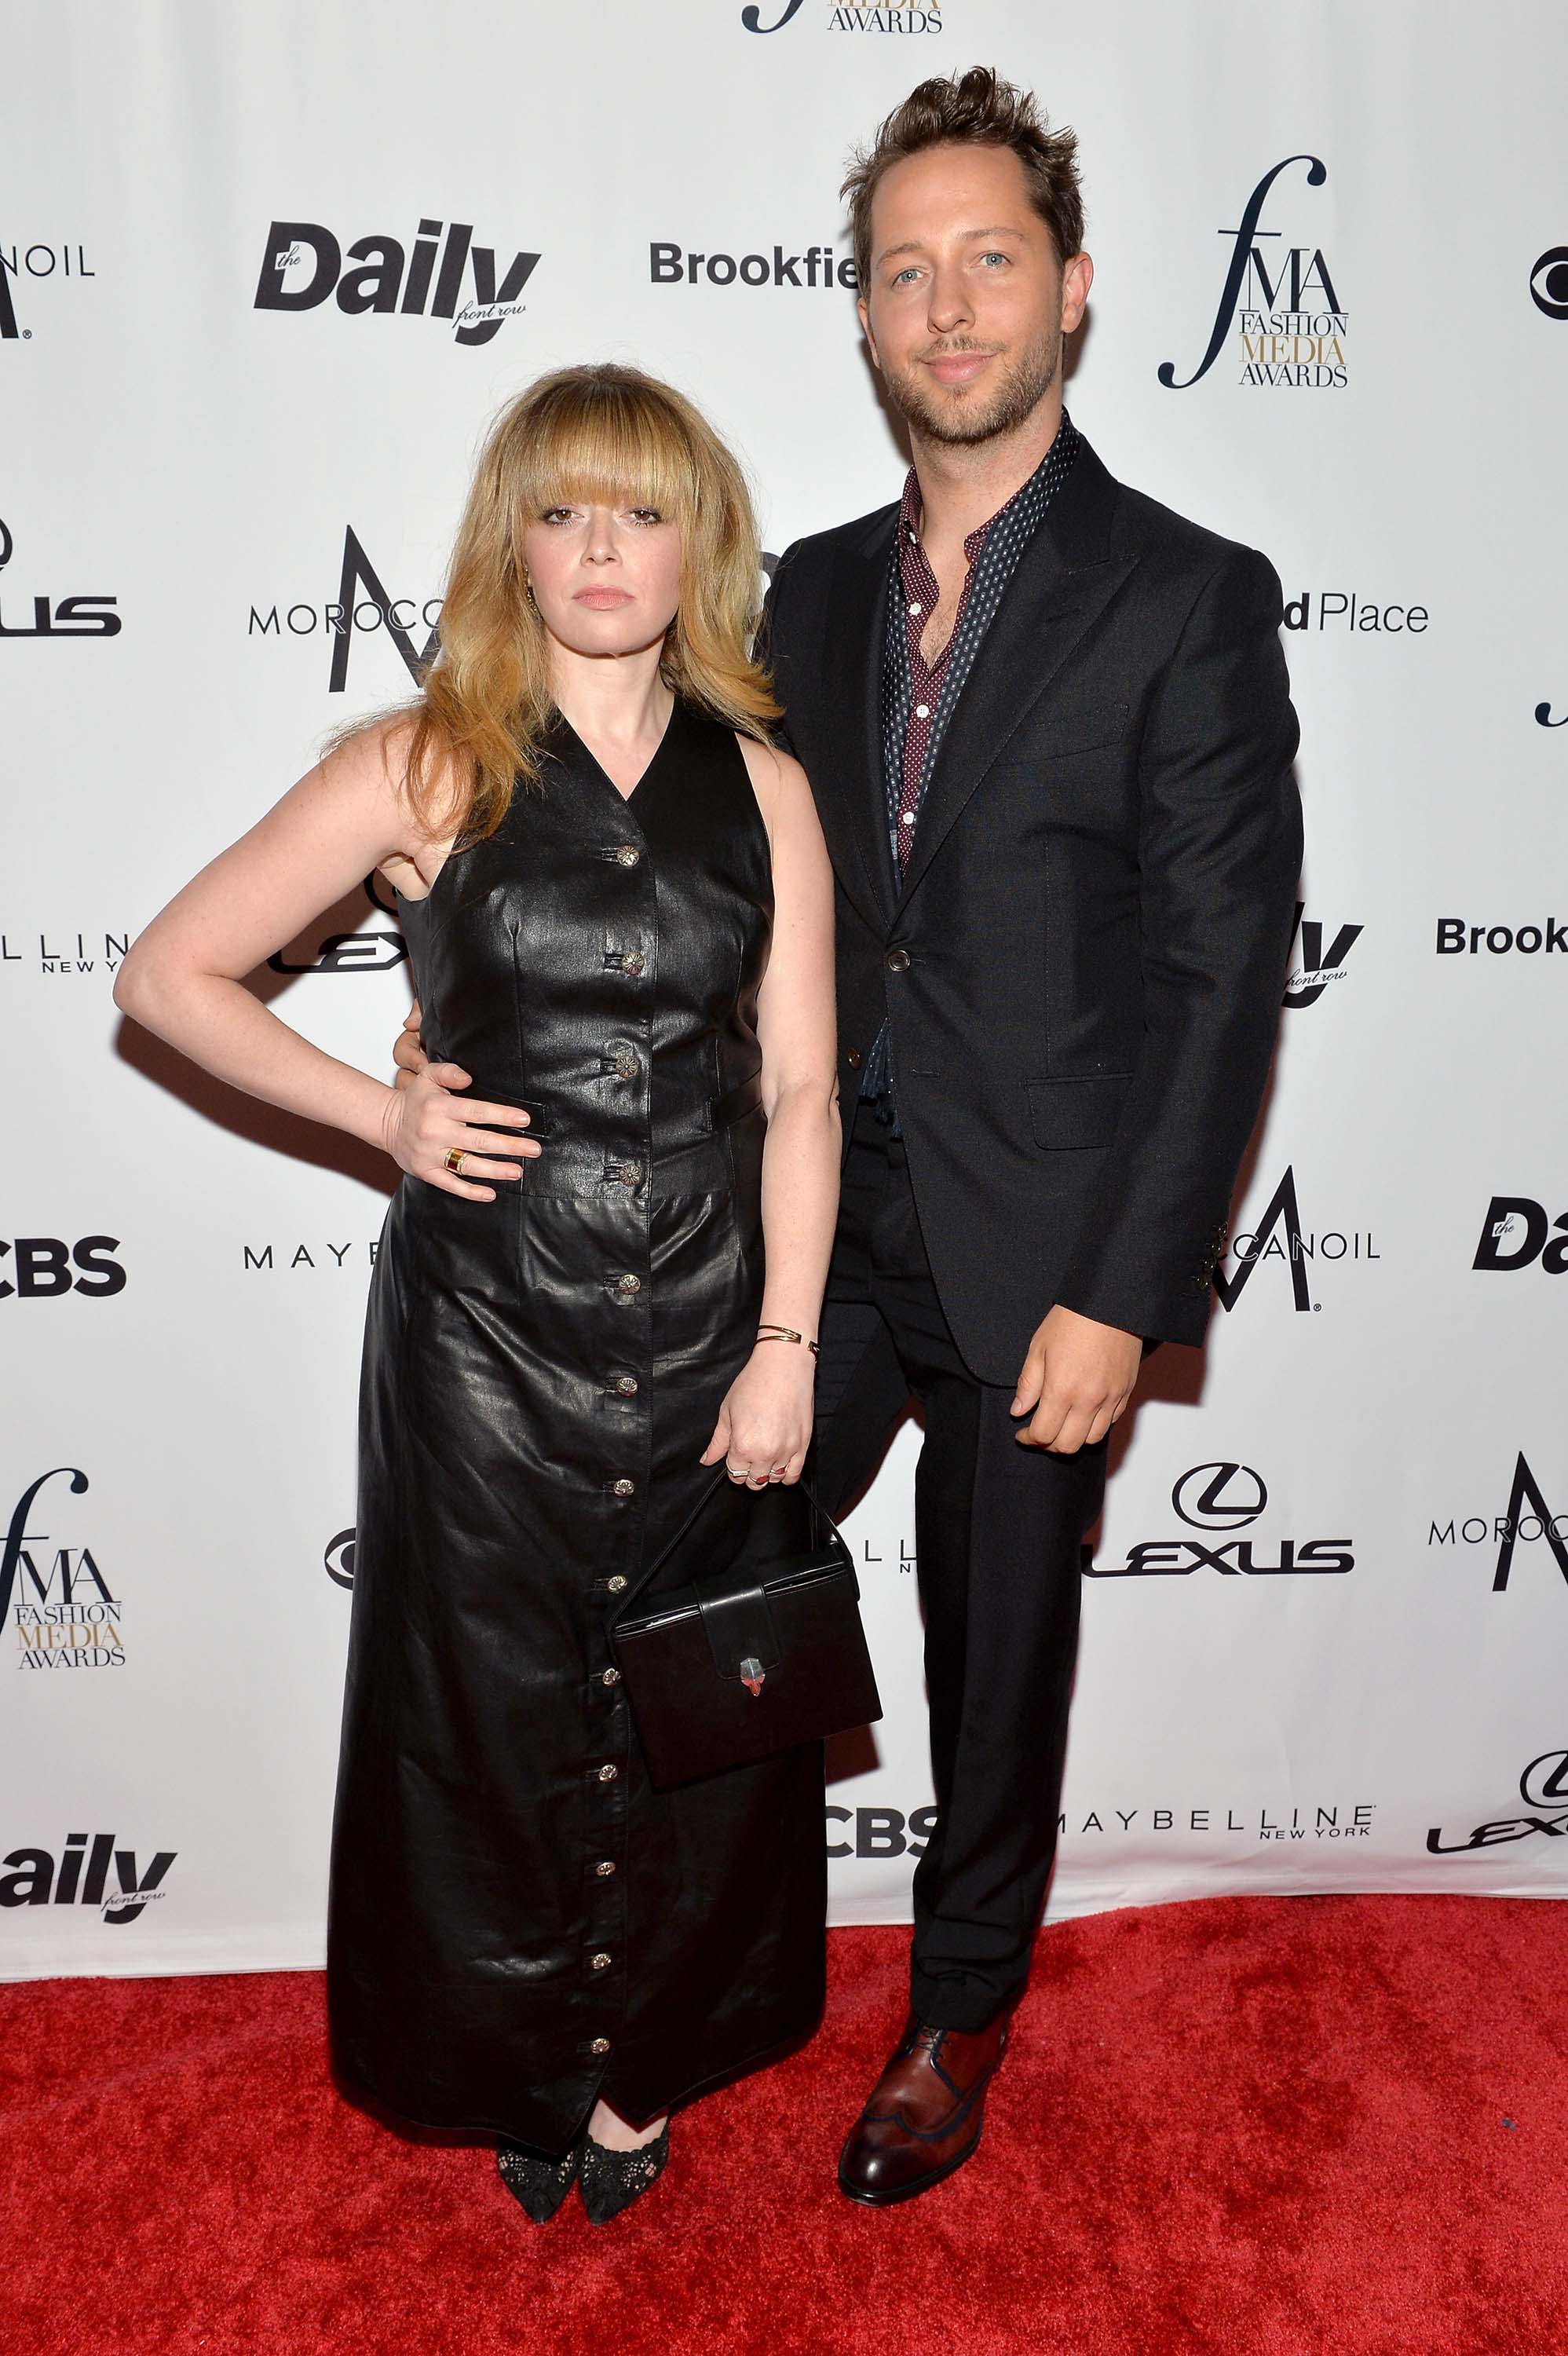 Natasha Lyonne attends the The Daily Front Row’s 4th Annual Fashion Media Awards